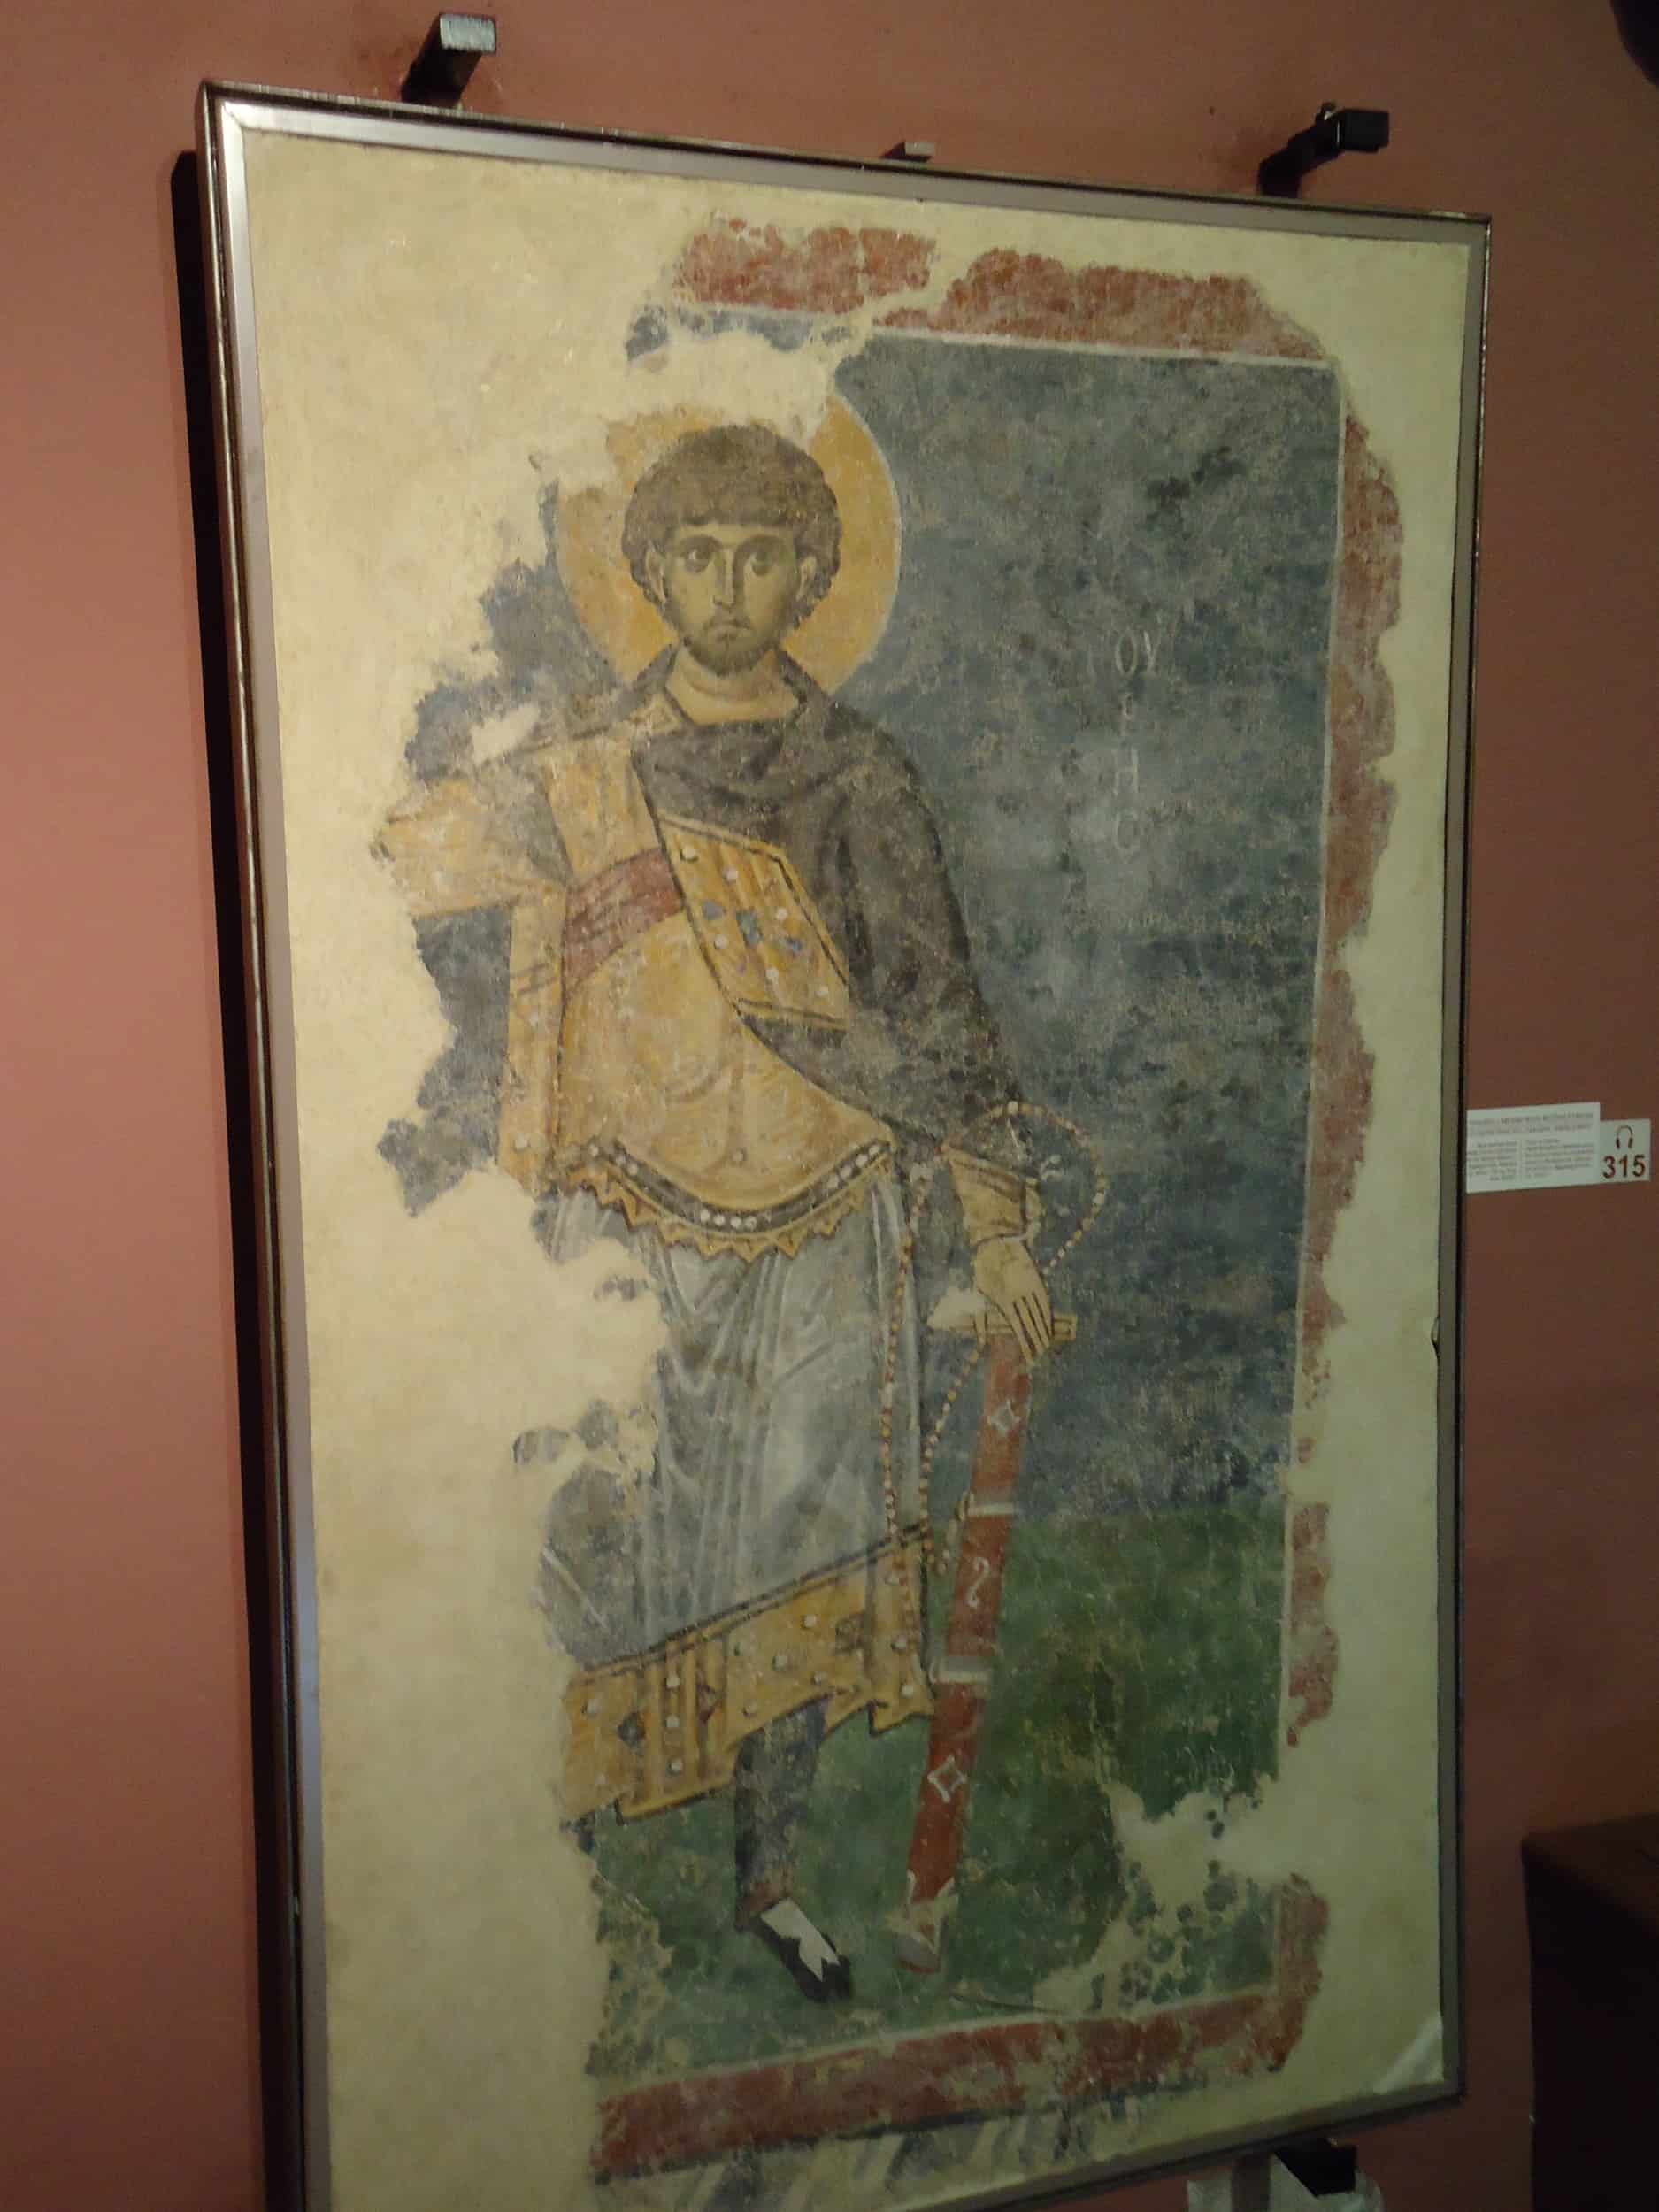 Fresco from a Byzantine church in Constantinople at the Istanbul Archaeology Museum in Istanbul, Turkey